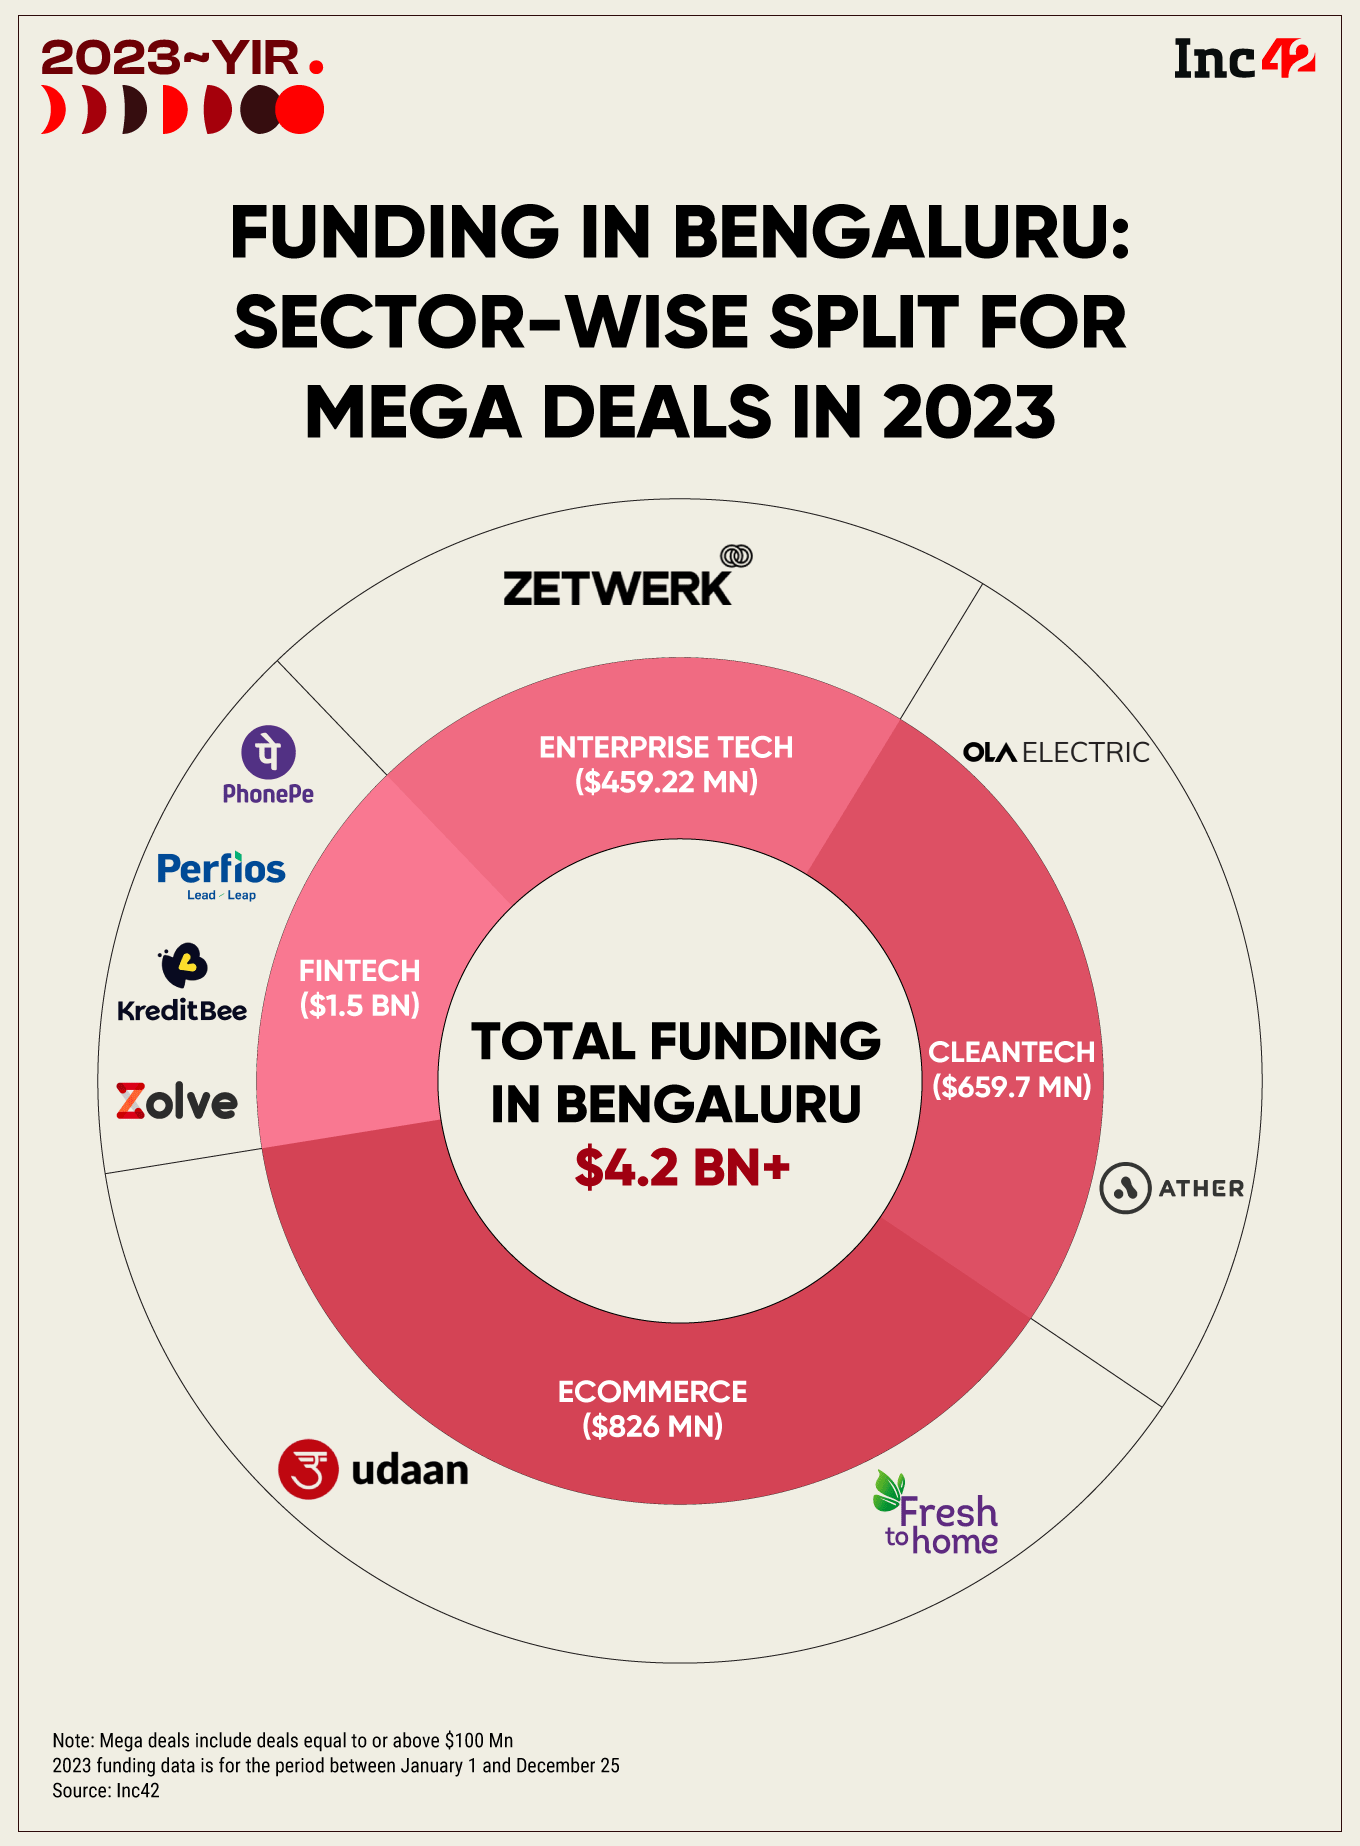 startup funding in Bengaluru tanked 61% year-on-year (YoY) to $4.2 Bn, even lower than the $5.3 Bn funding raised by the city’s startups in 2018